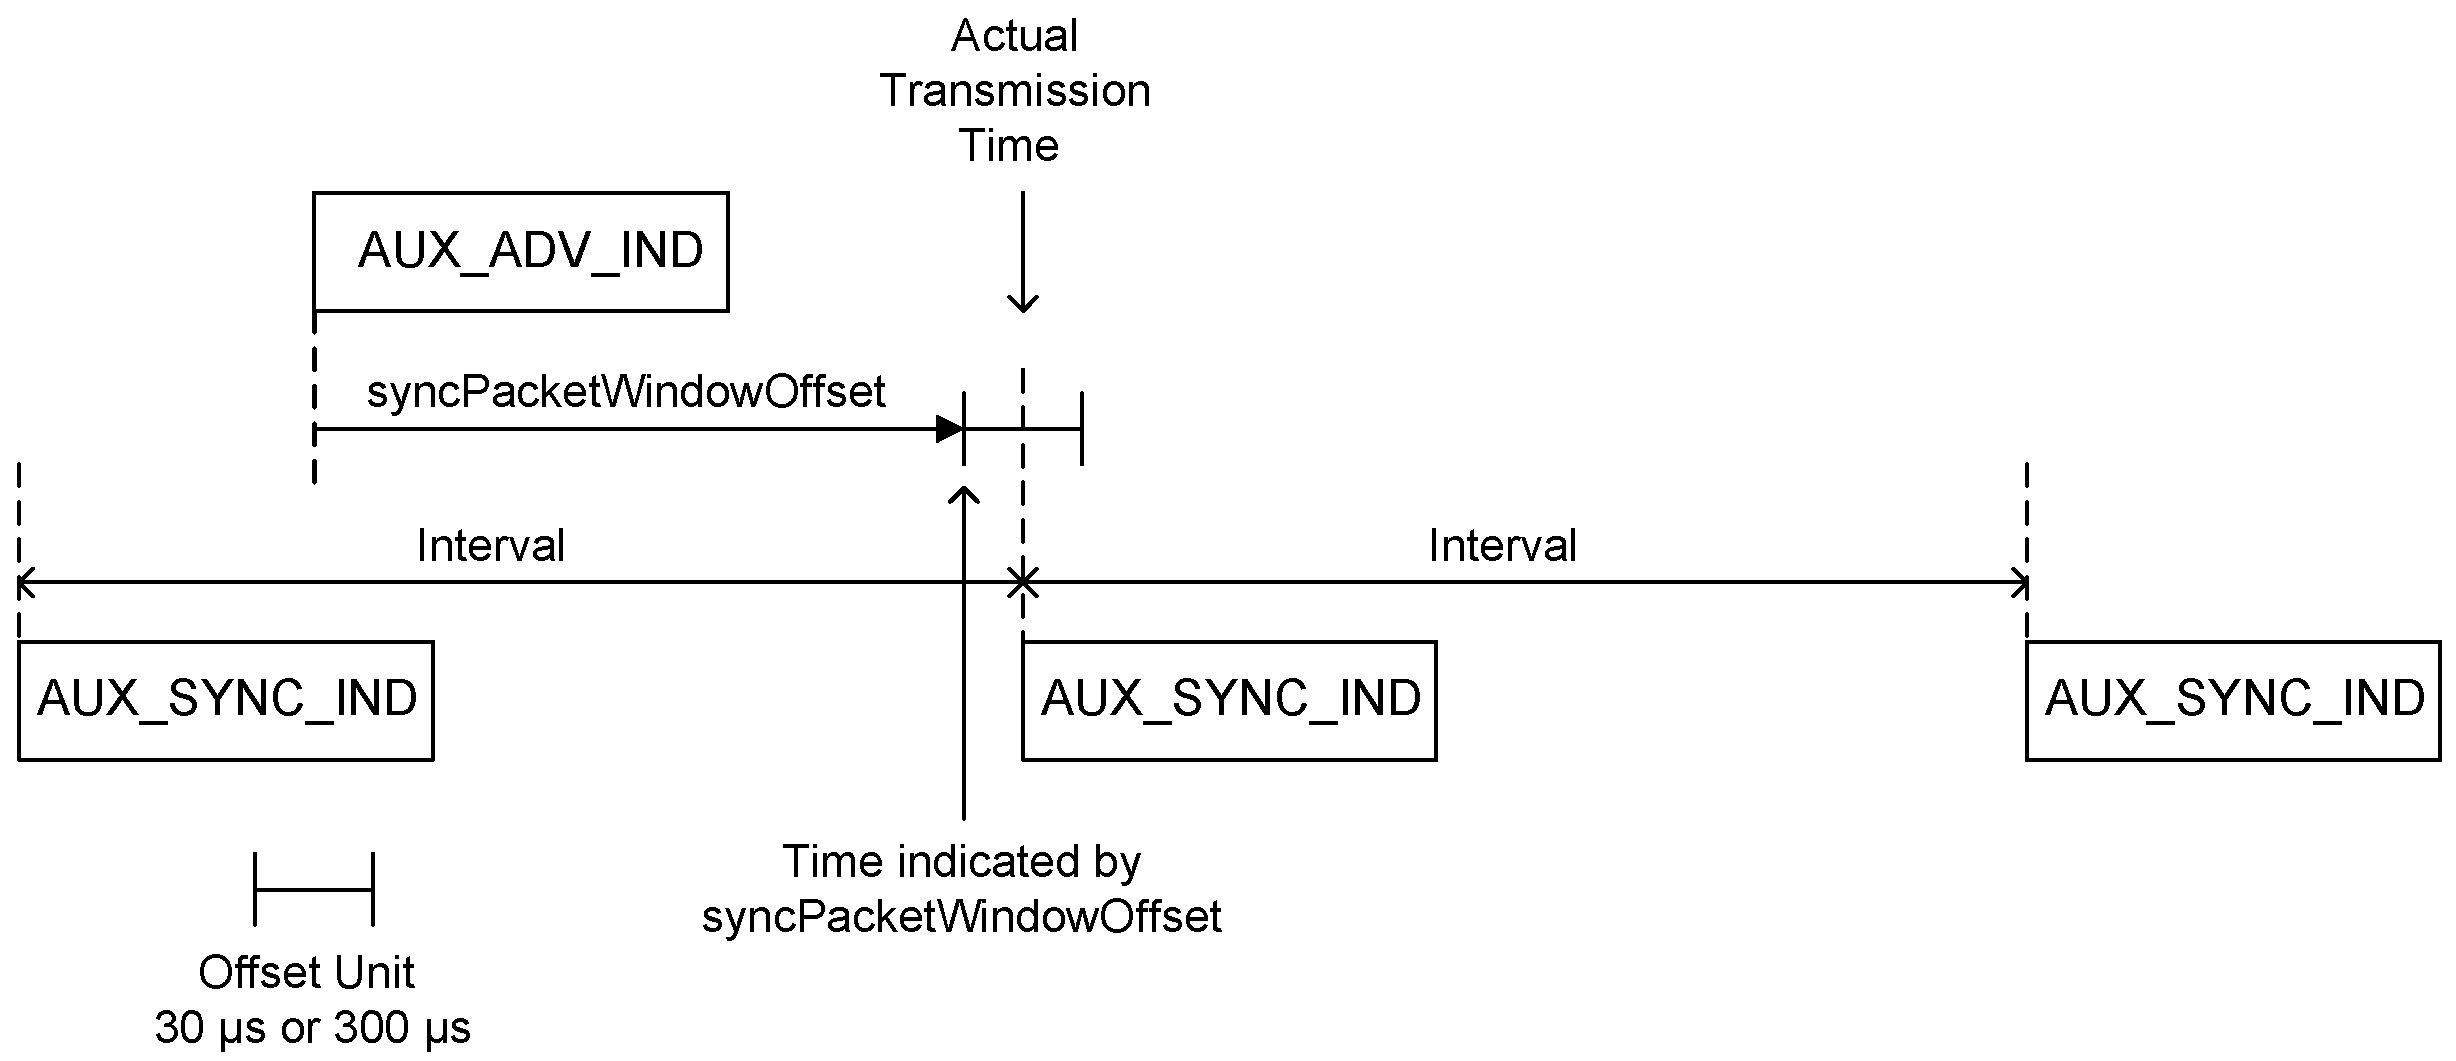 Transmission window represented by syncPacketWindowOffset